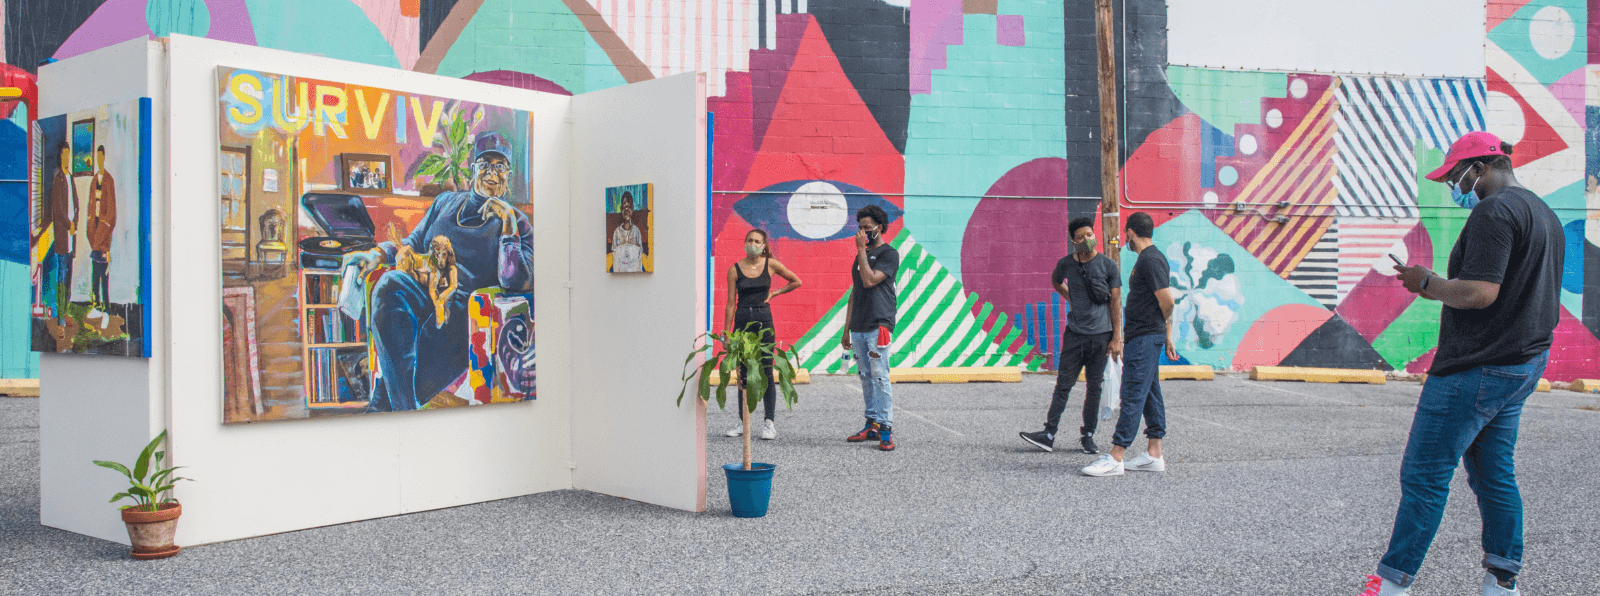 Five people in front of a mural and in a parking lot looking at paintings installed on a free standing white wall